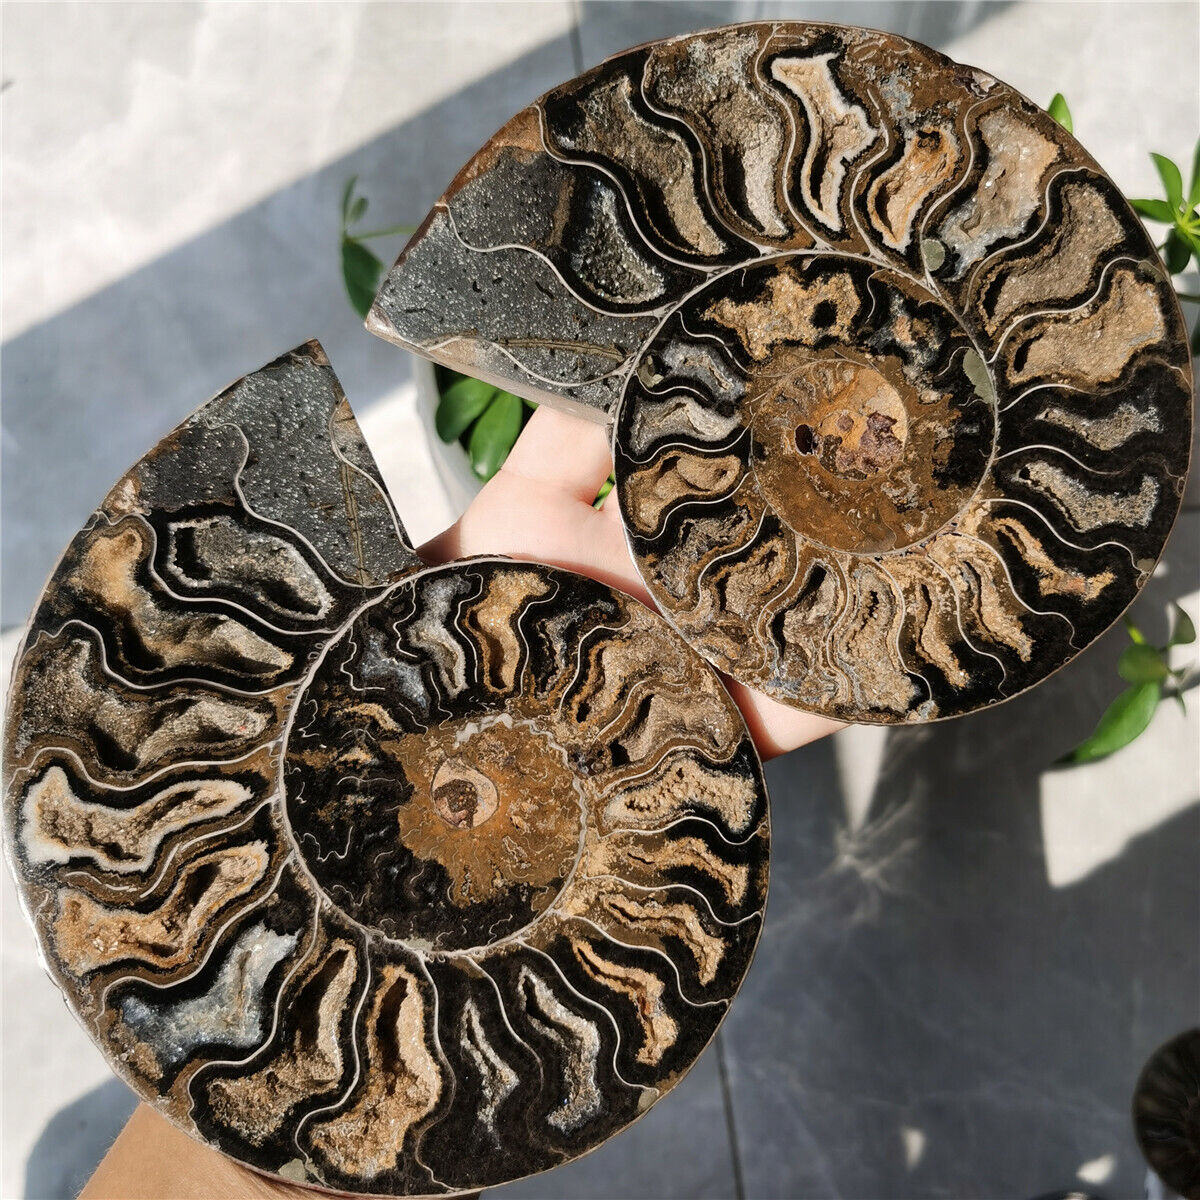 816g A pair of Natural Ammonite Fossil slice healing Madagascar W 5694